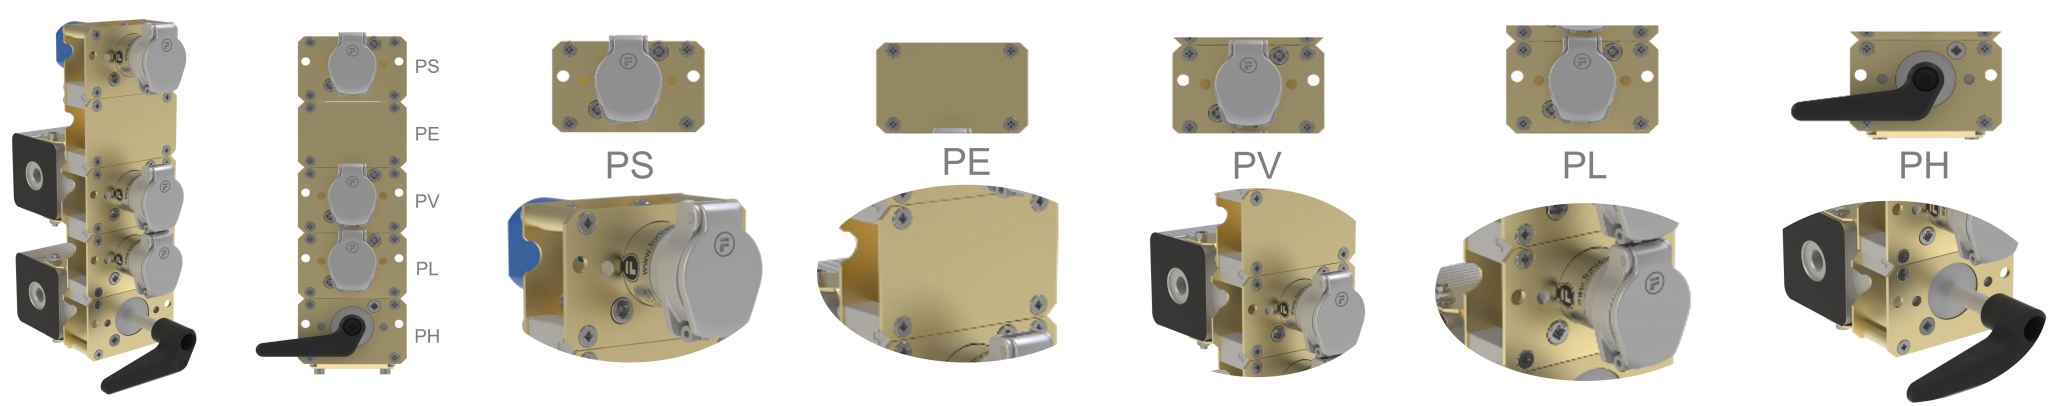 Integrated Control Systems with Pneumatic Trapped Key Isolation